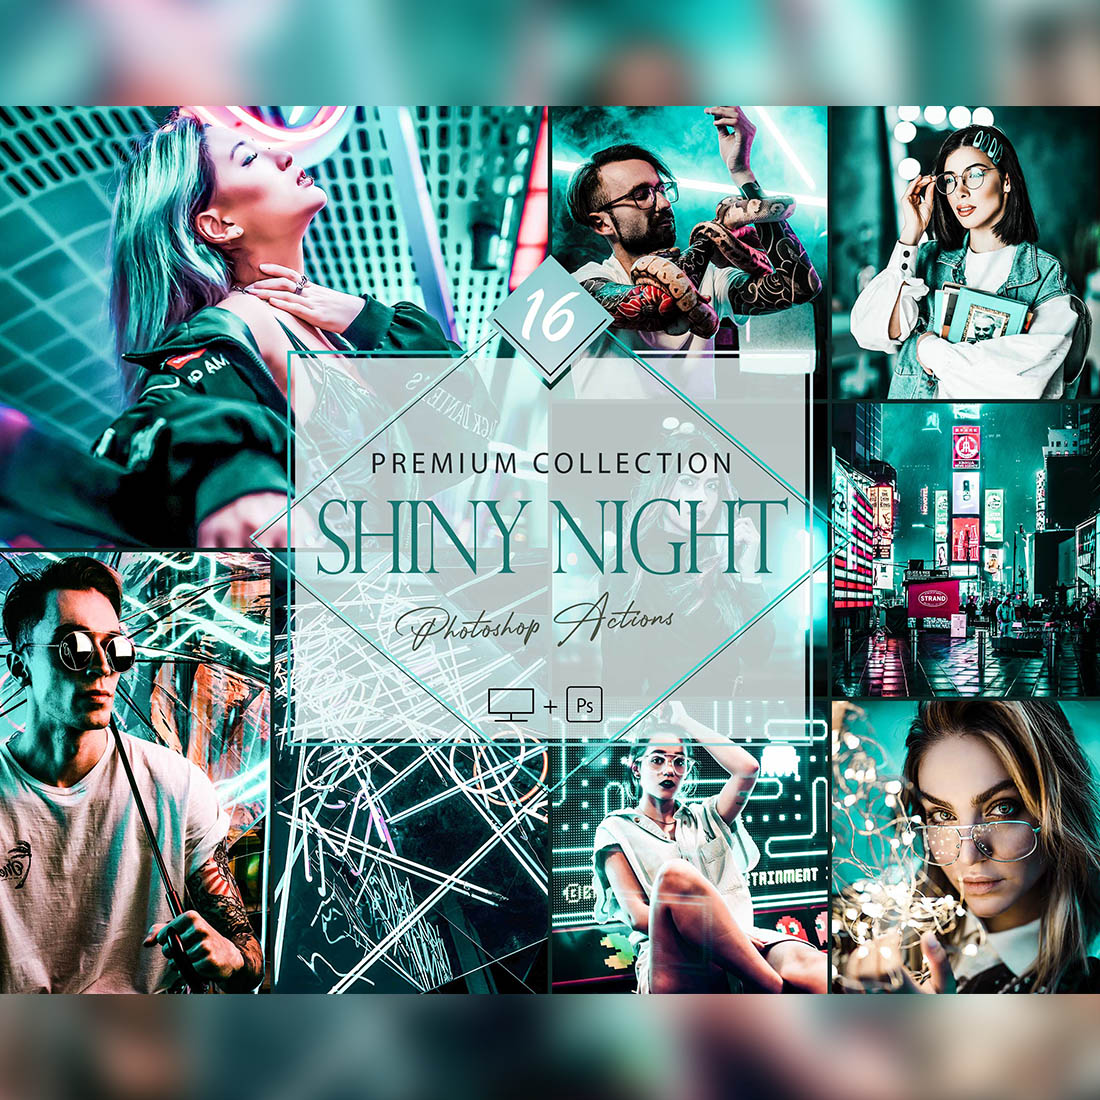 16 Photoshop Actions, Shiny Night Ps Action, Moody ACR Preset, Neon Filter, Lifestyle Theme For Instagram, Light Presets, Street Portrait cover image.